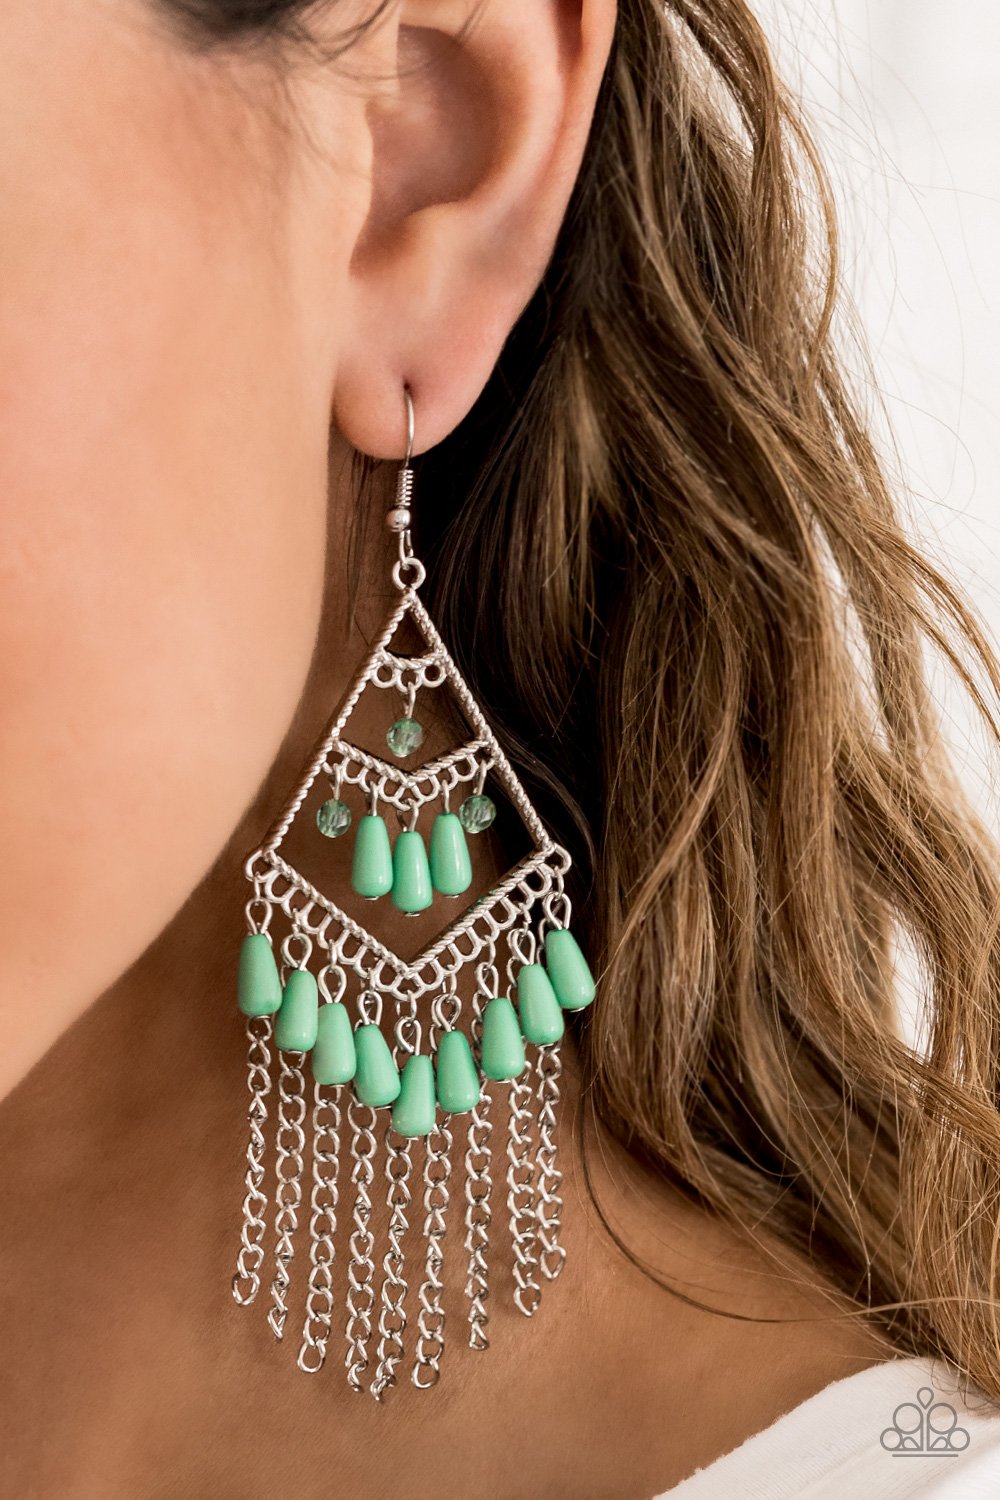 Trending Transcendence Paparazzi Accessories Earrings